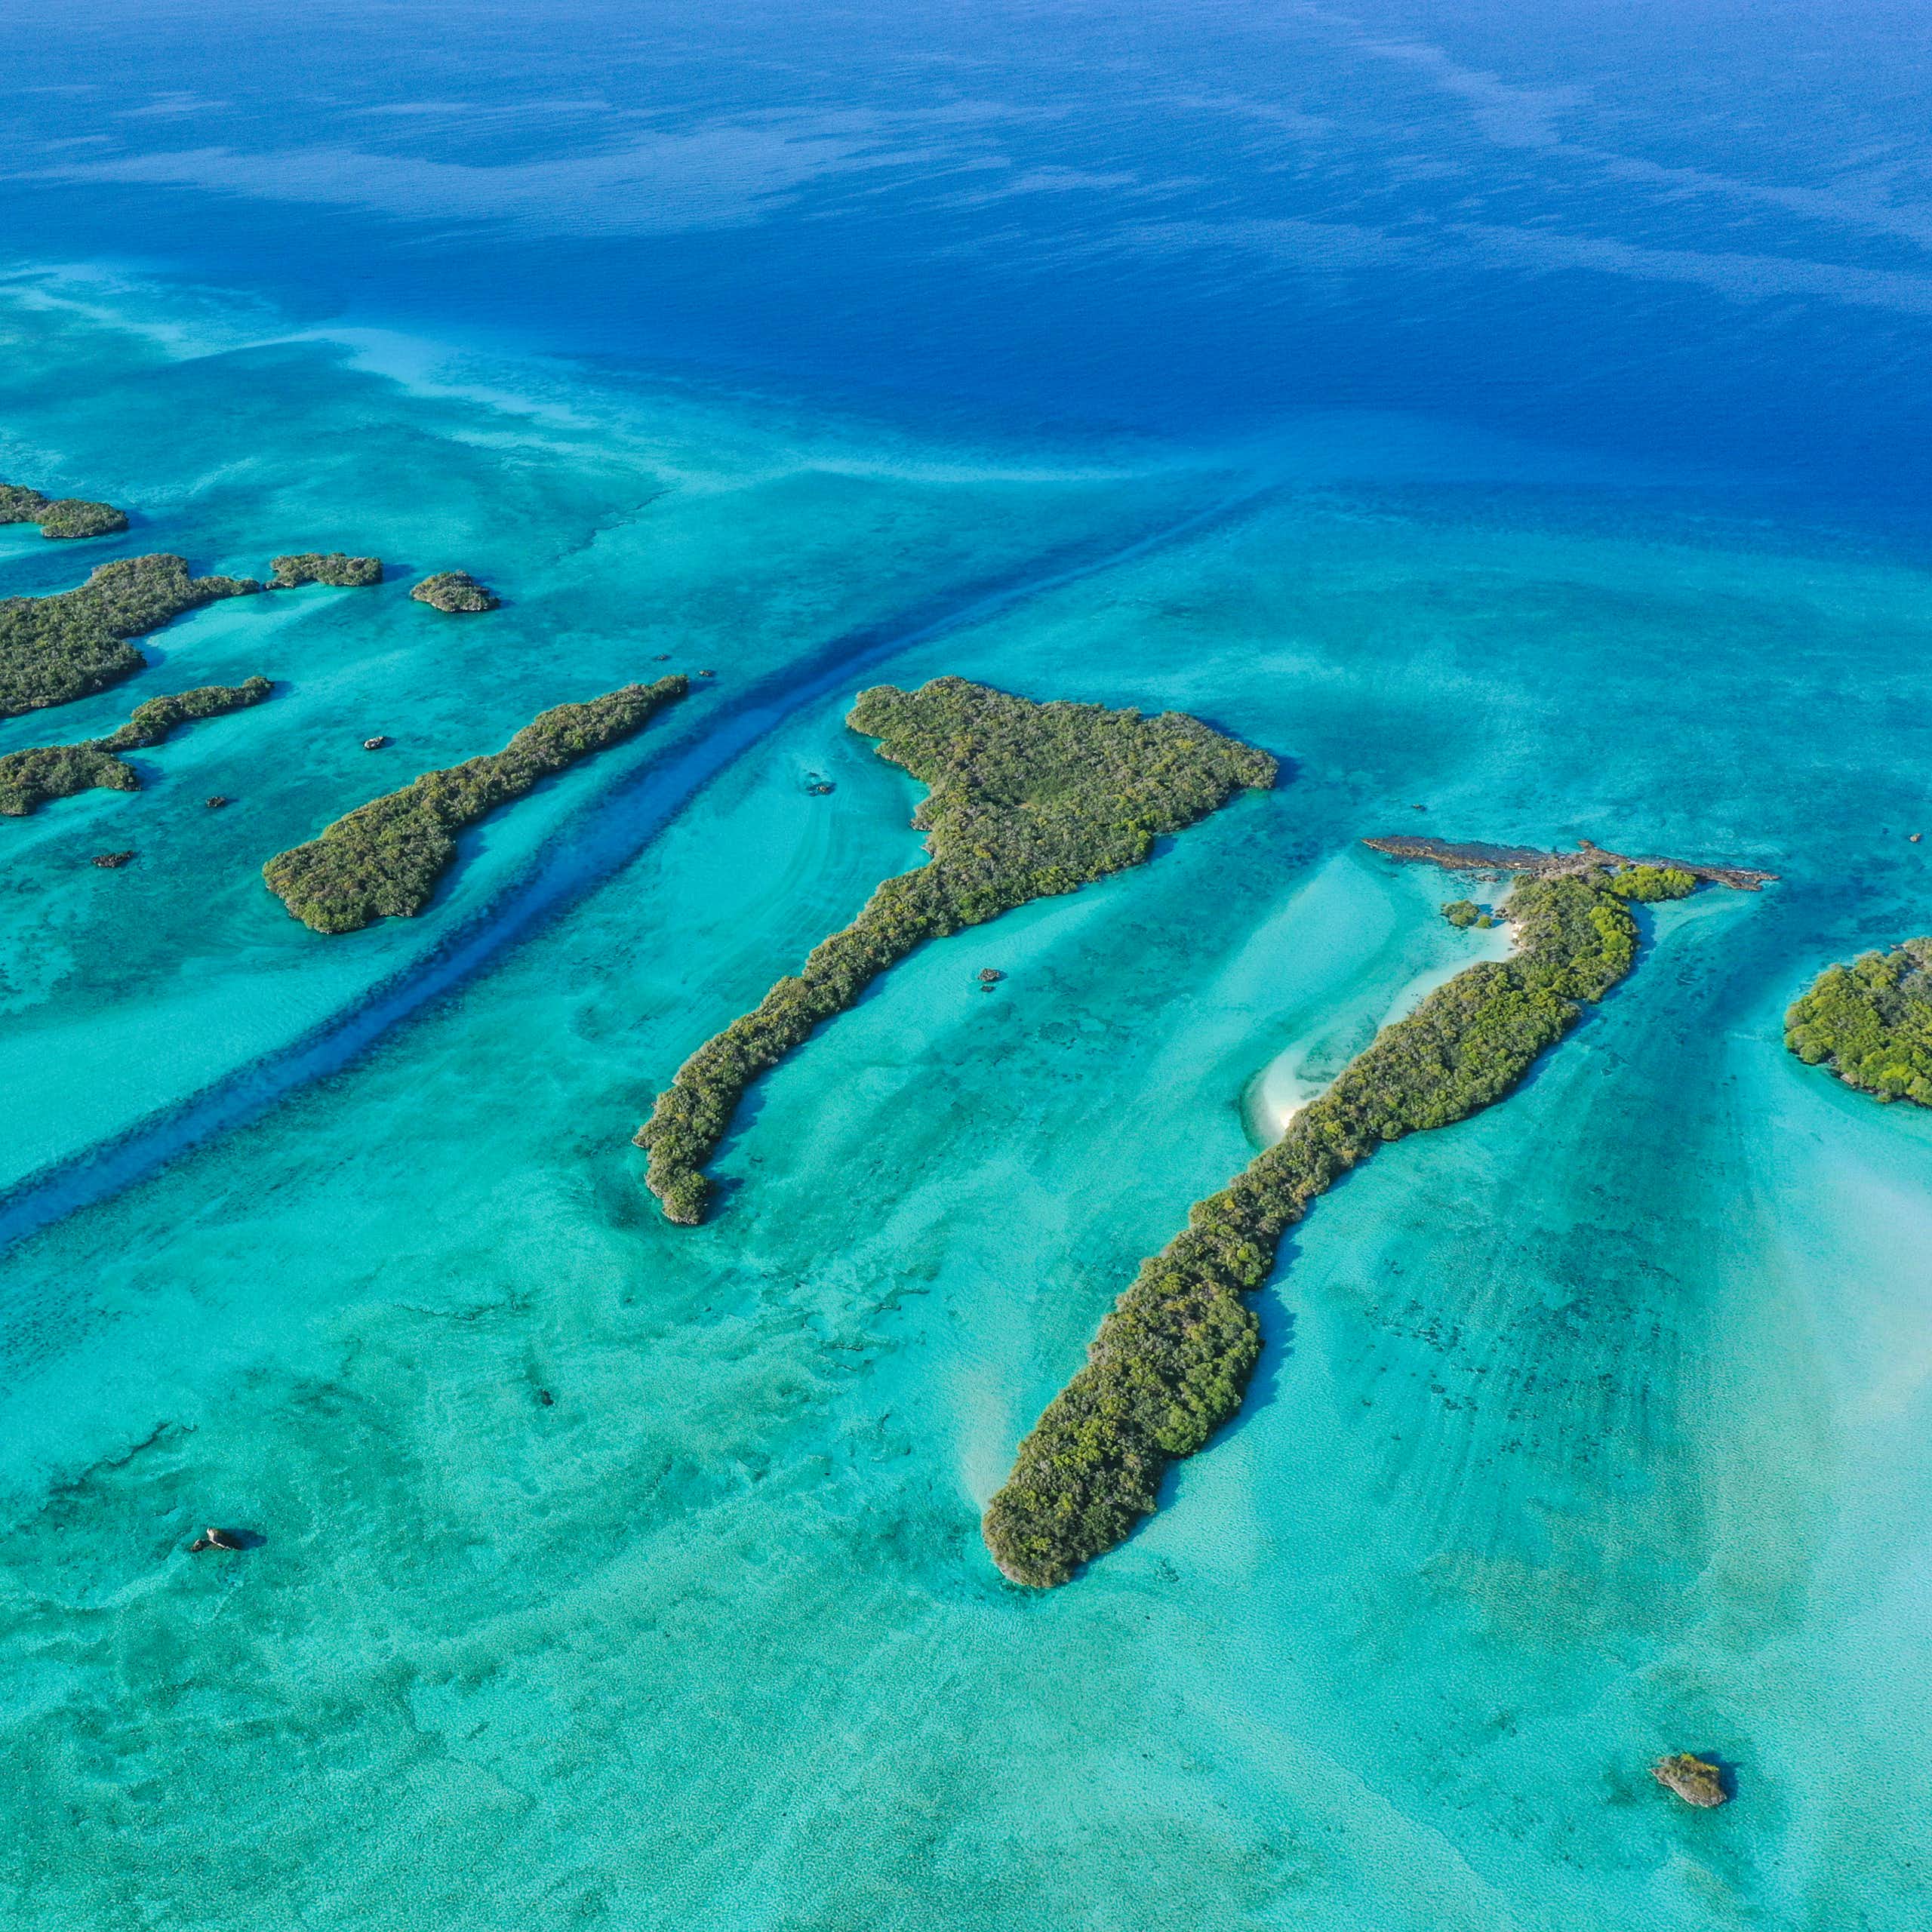 Aerial view of small islands in the ocean.